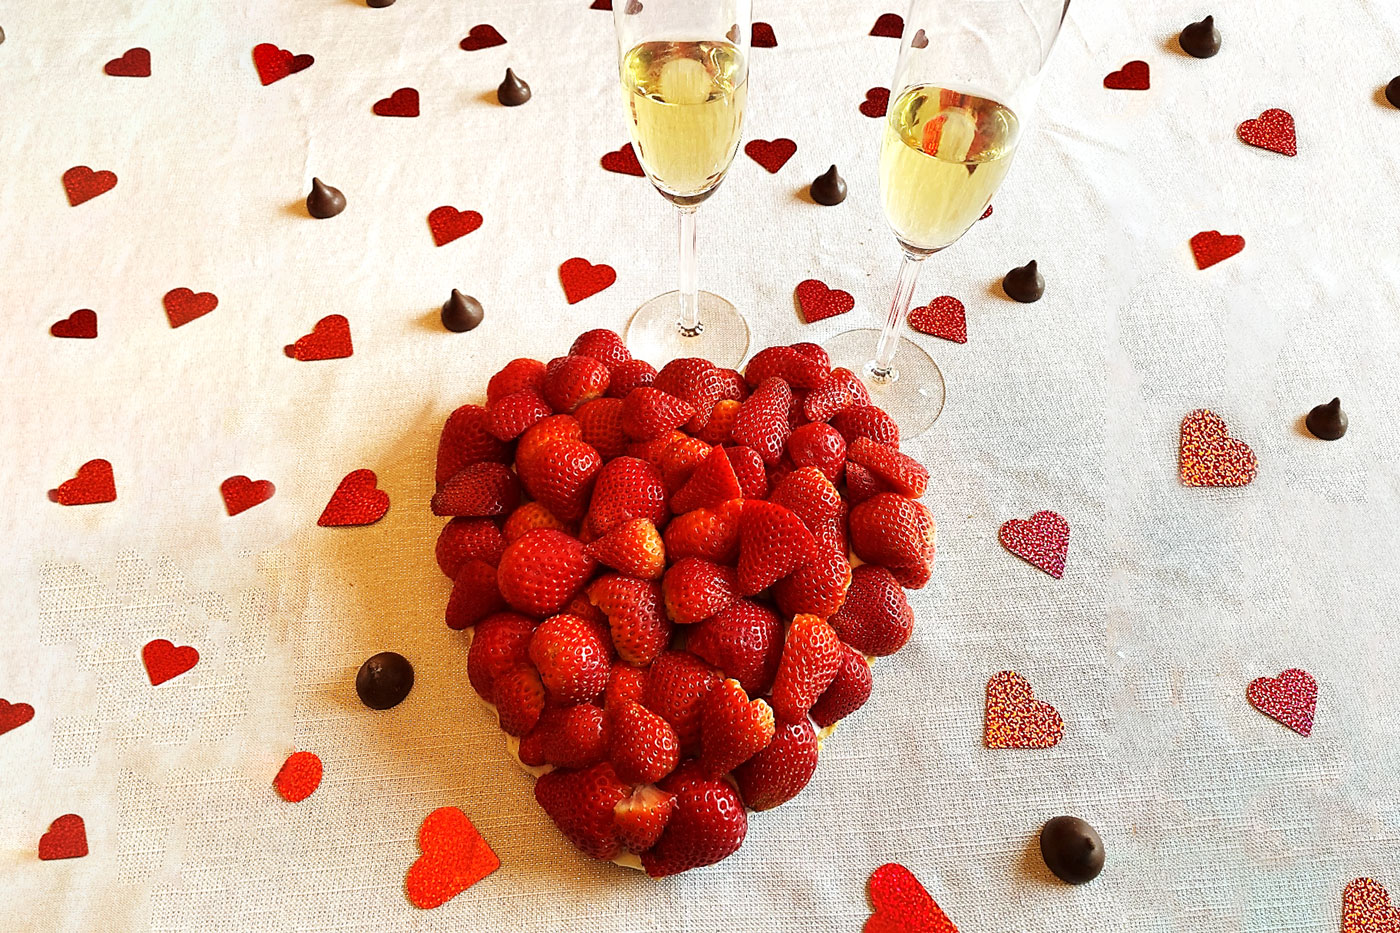 strawberries piled on a heart-shaped pie